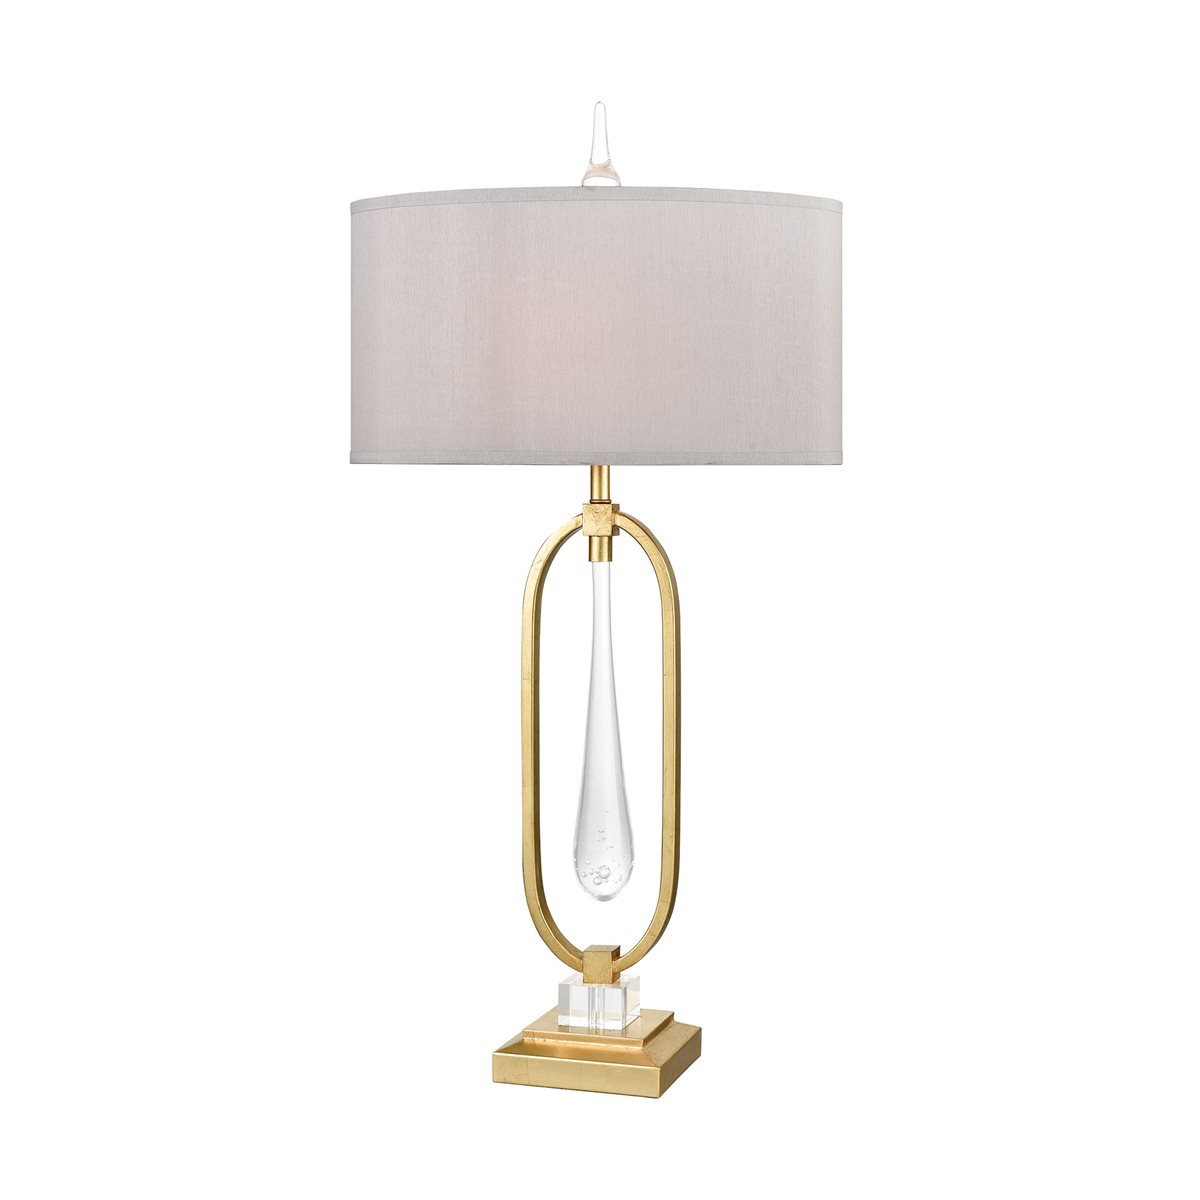 SPRING TABLE LAMP